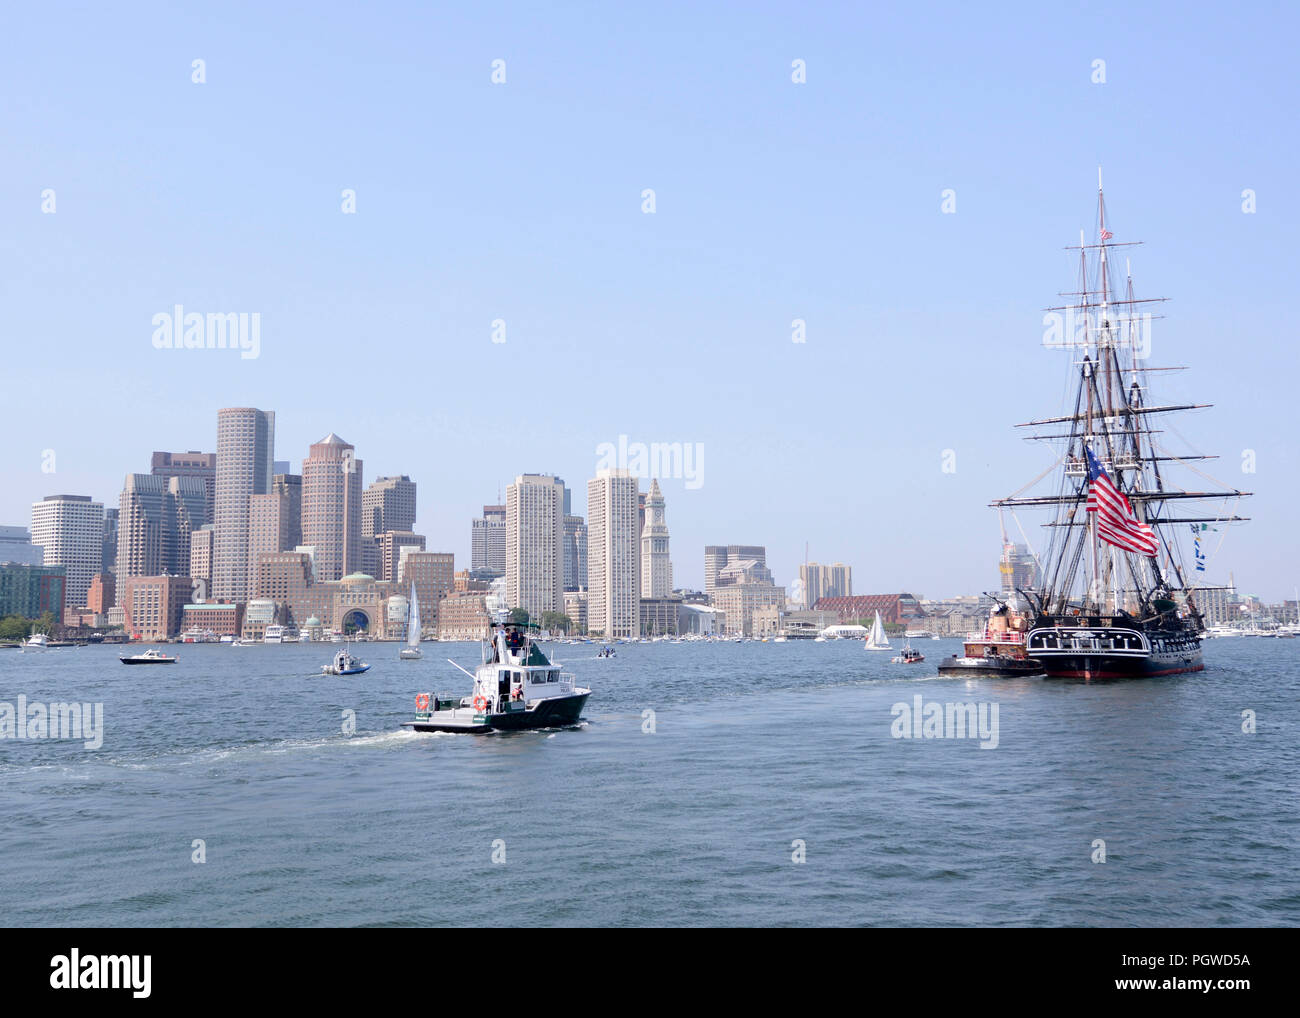 180824-N-AE894-0009 BOSTON (Aug. 24, 2018) USS Constitution is tugged out to Fort Independence on Castle Island during 'Old Ironsides' Chief Petty Officer Heritage Week underway. Chief Petty Officer Heritage Week is a week dedicated to mentoring the Navy's newest chiefs through naval history and heritage training aboard America's Ship of State, USS Constitution. (U.S. Navy photo by Seaman Donovan Keller/Released) Stock Photo